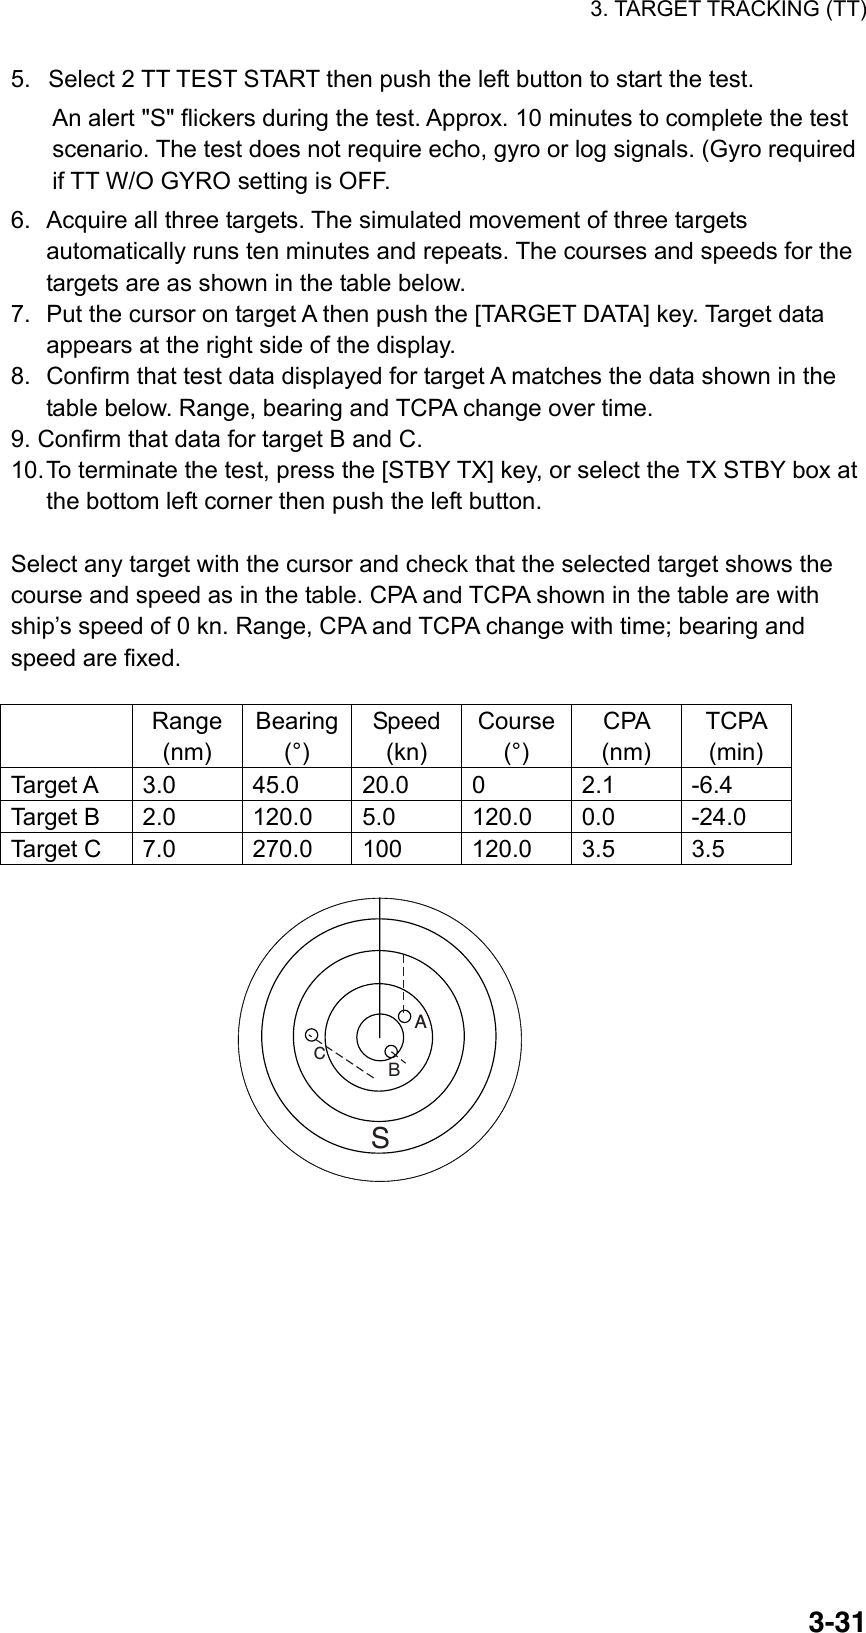 3. TARGET TRACKING (TT)  3-315.  Select 2 TT TEST START then push the left button to start the test.   An alert &quot;S&quot; flickers during the test. Approx. 10 minutes to complete the test scenario. The test does not require echo, gyro or log signals. (Gyro required if TT W/O GYRO setting is OFF. 6.  Acquire all three targets. The simulated movement of three targets automatically runs ten minutes and repeats. The courses and speeds for the targets are as shown in the table below.     7.  Put the cursor on target A then push the [TARGET DATA] key. Target data appears at the right side of the display. 8.  Confirm that test data displayed for target A matches the data shown in the table below. Range, bearing and TCPA change over time. 9. Confirm that data for target B and C. 10. To terminate the test, press the [STBY TX] key, or select the TX STBY box at the bottom left corner then push the left button.  Select any target with the cursor and check that the selected target shows the course and speed as in the table. CPA and TCPA shown in the table are with ship’s speed of 0 kn. Range, CPA and TCPA change with time; bearing and speed are fixed.     Range (nm) Bearing(°) Speed (kn) Course(°) CPA  (nm) TCPA (min) Target A 3.0  45.0 20.0 0  2.1  -6.4 Target B 2.0 120.0 5.0 120.0 0.0 -24.0 Target C  7.0  270.0  100  120.0  3.5  3.5 ASCB  